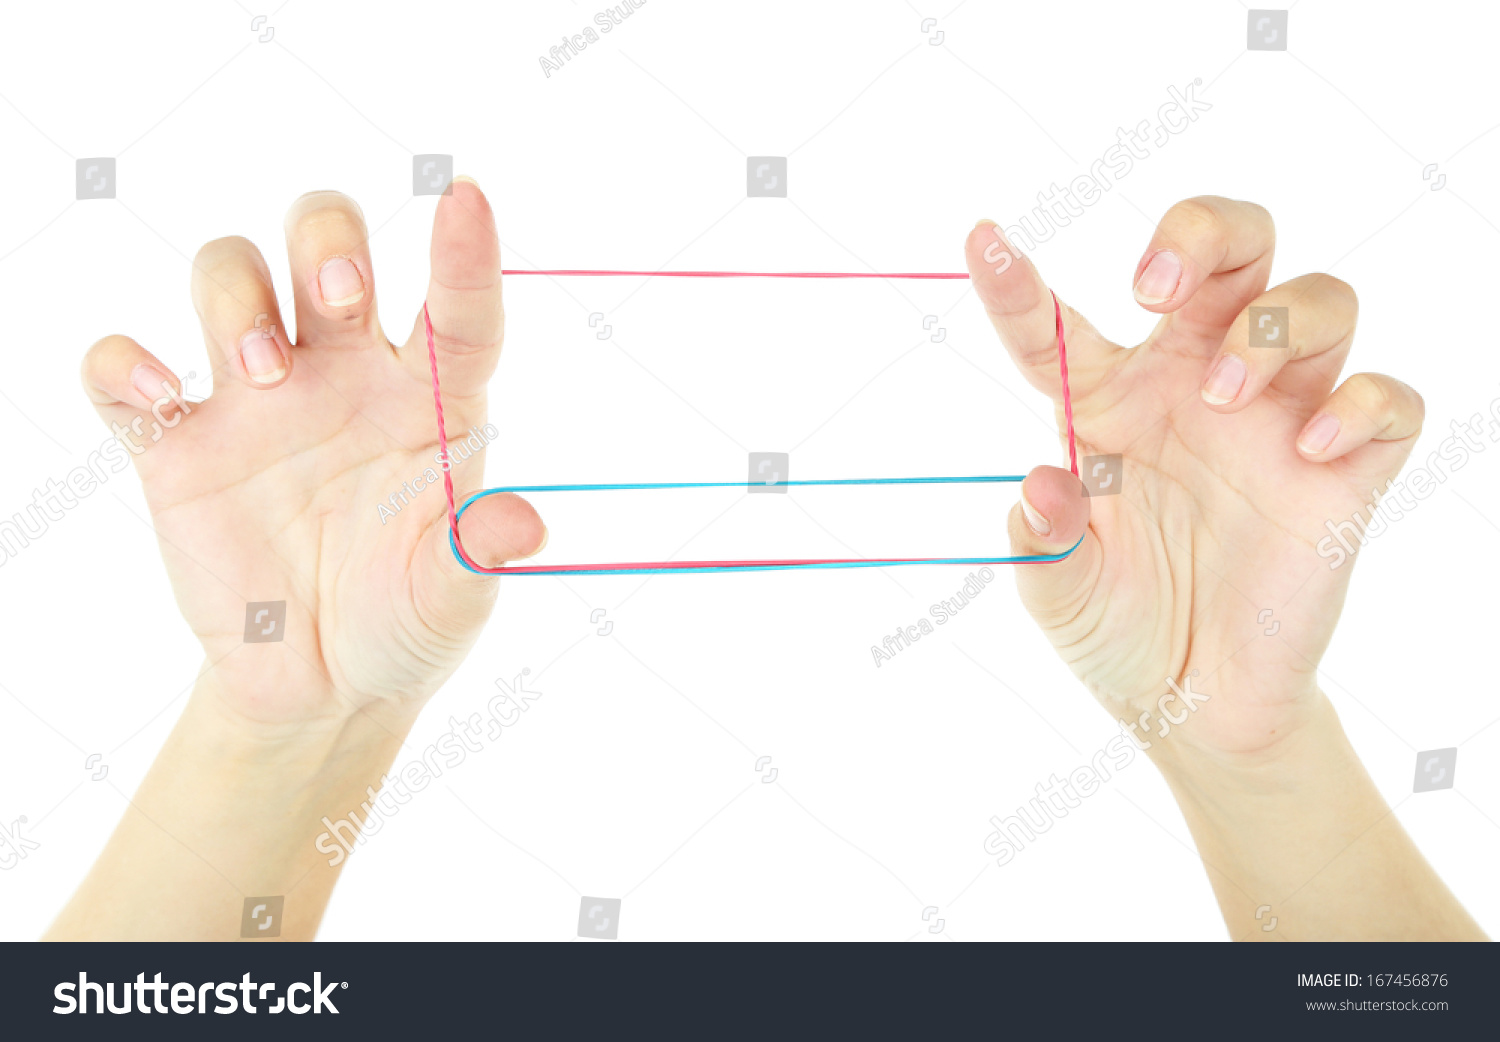 Game with an elastic band, isolated on white #167456876